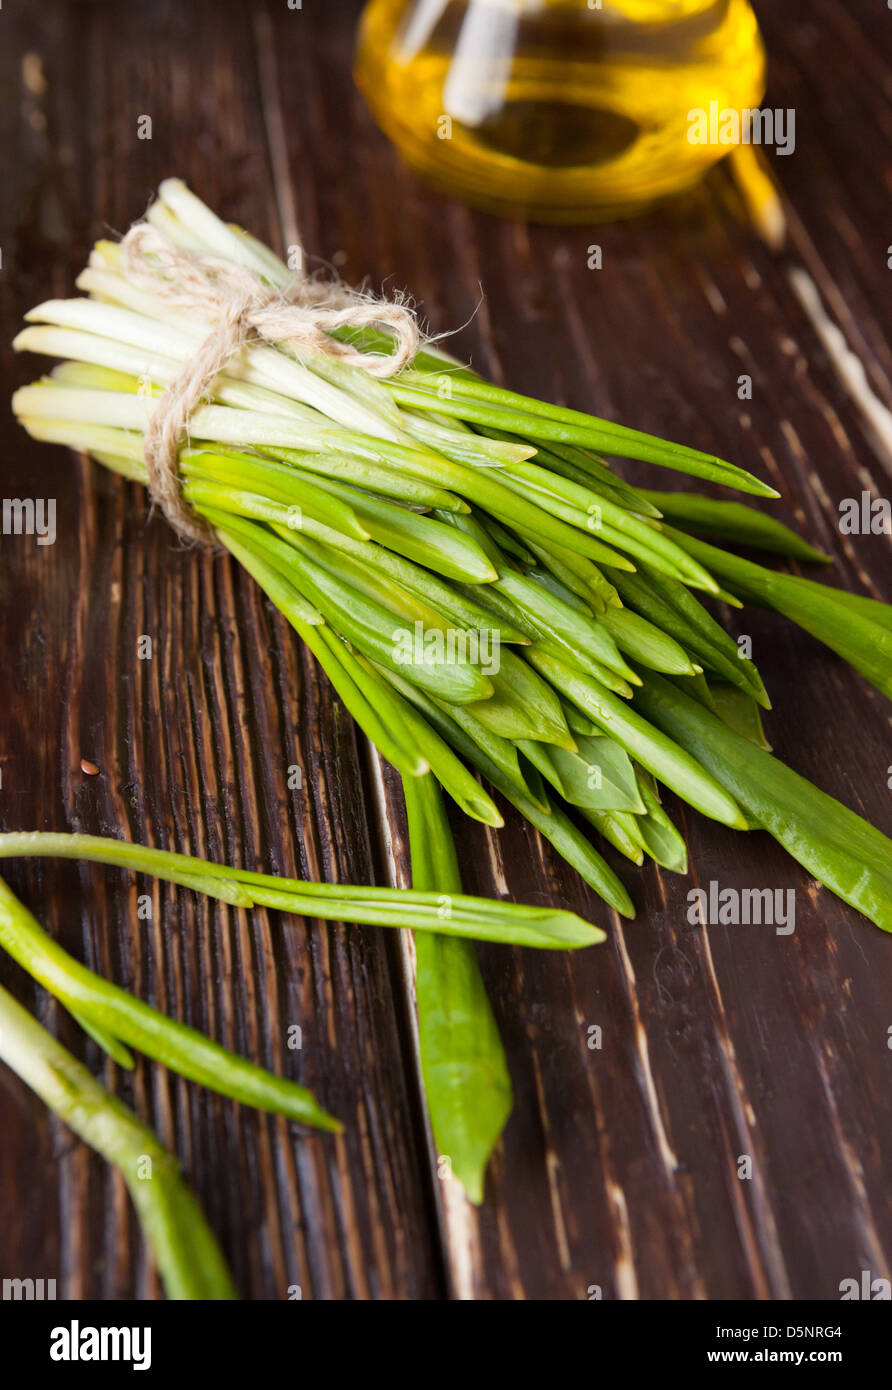 armful of ramson tied a rope on the boards, greens Stock Photo